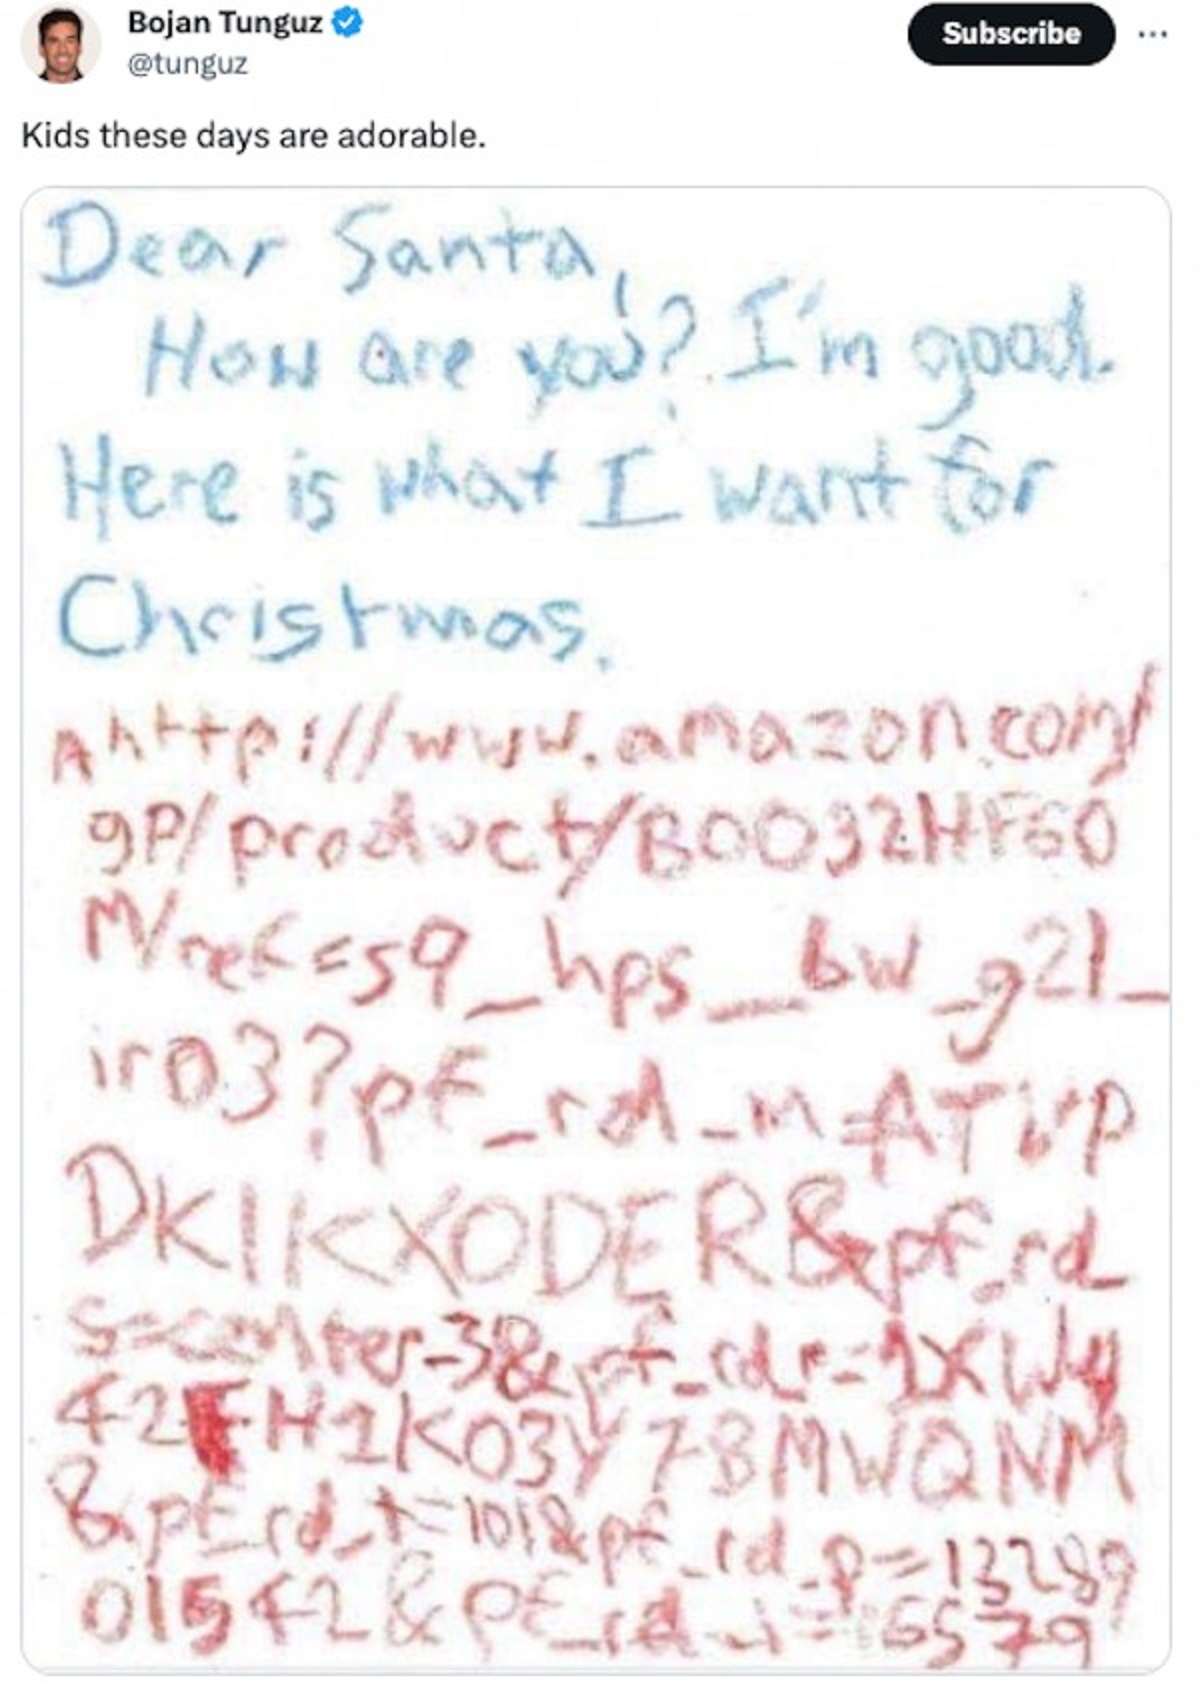 santa letter with amazon link - Bojan Tunguz Subscribe Kids these days are adorable. Dear Santa, How are you? I'm good. Here is what I want for Christmas. Ahttp gpproductB0032HF60 Mrekes9_hps_bw_g21_ iro3?pf_rd_mAtup Dkikkoder &pfrd secenter38 of_rdr1xWy 